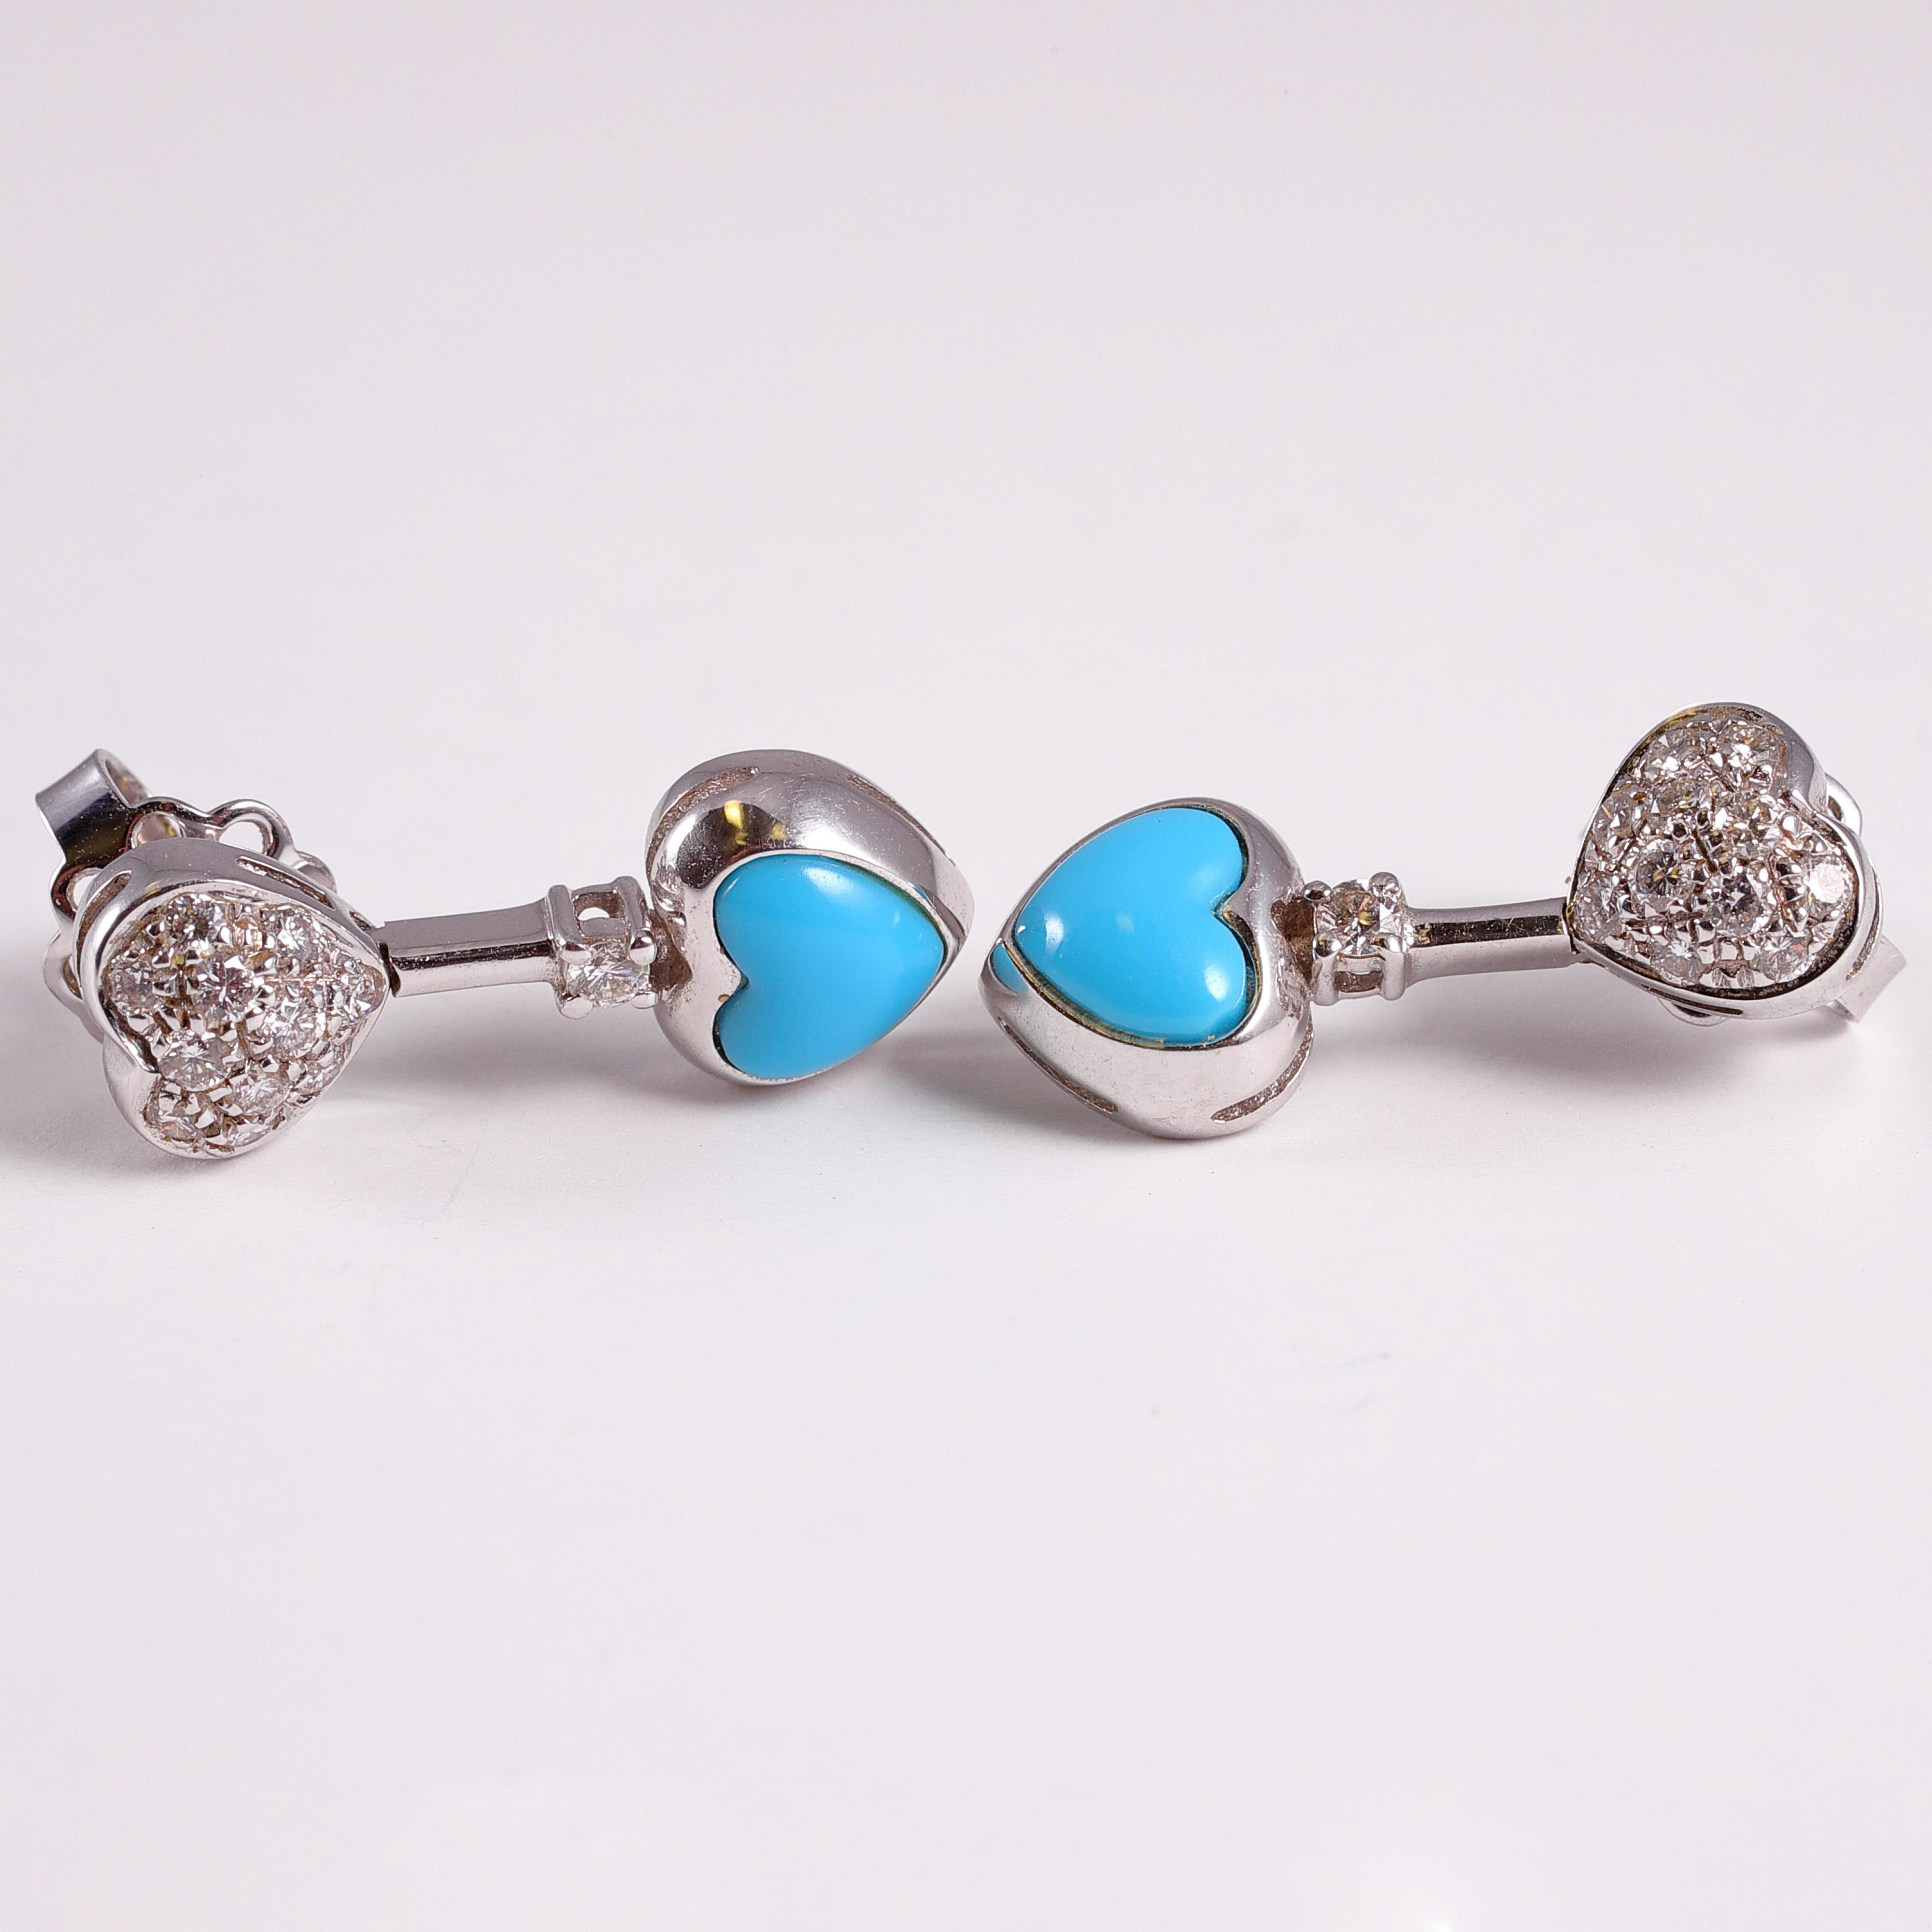 Composed of 18 karat white gold, the heart-shaped stabilized turquoise stones have been tested by Stone Group Labs who found no dyes detected.  The bead-set diamonds are a lovely accent!